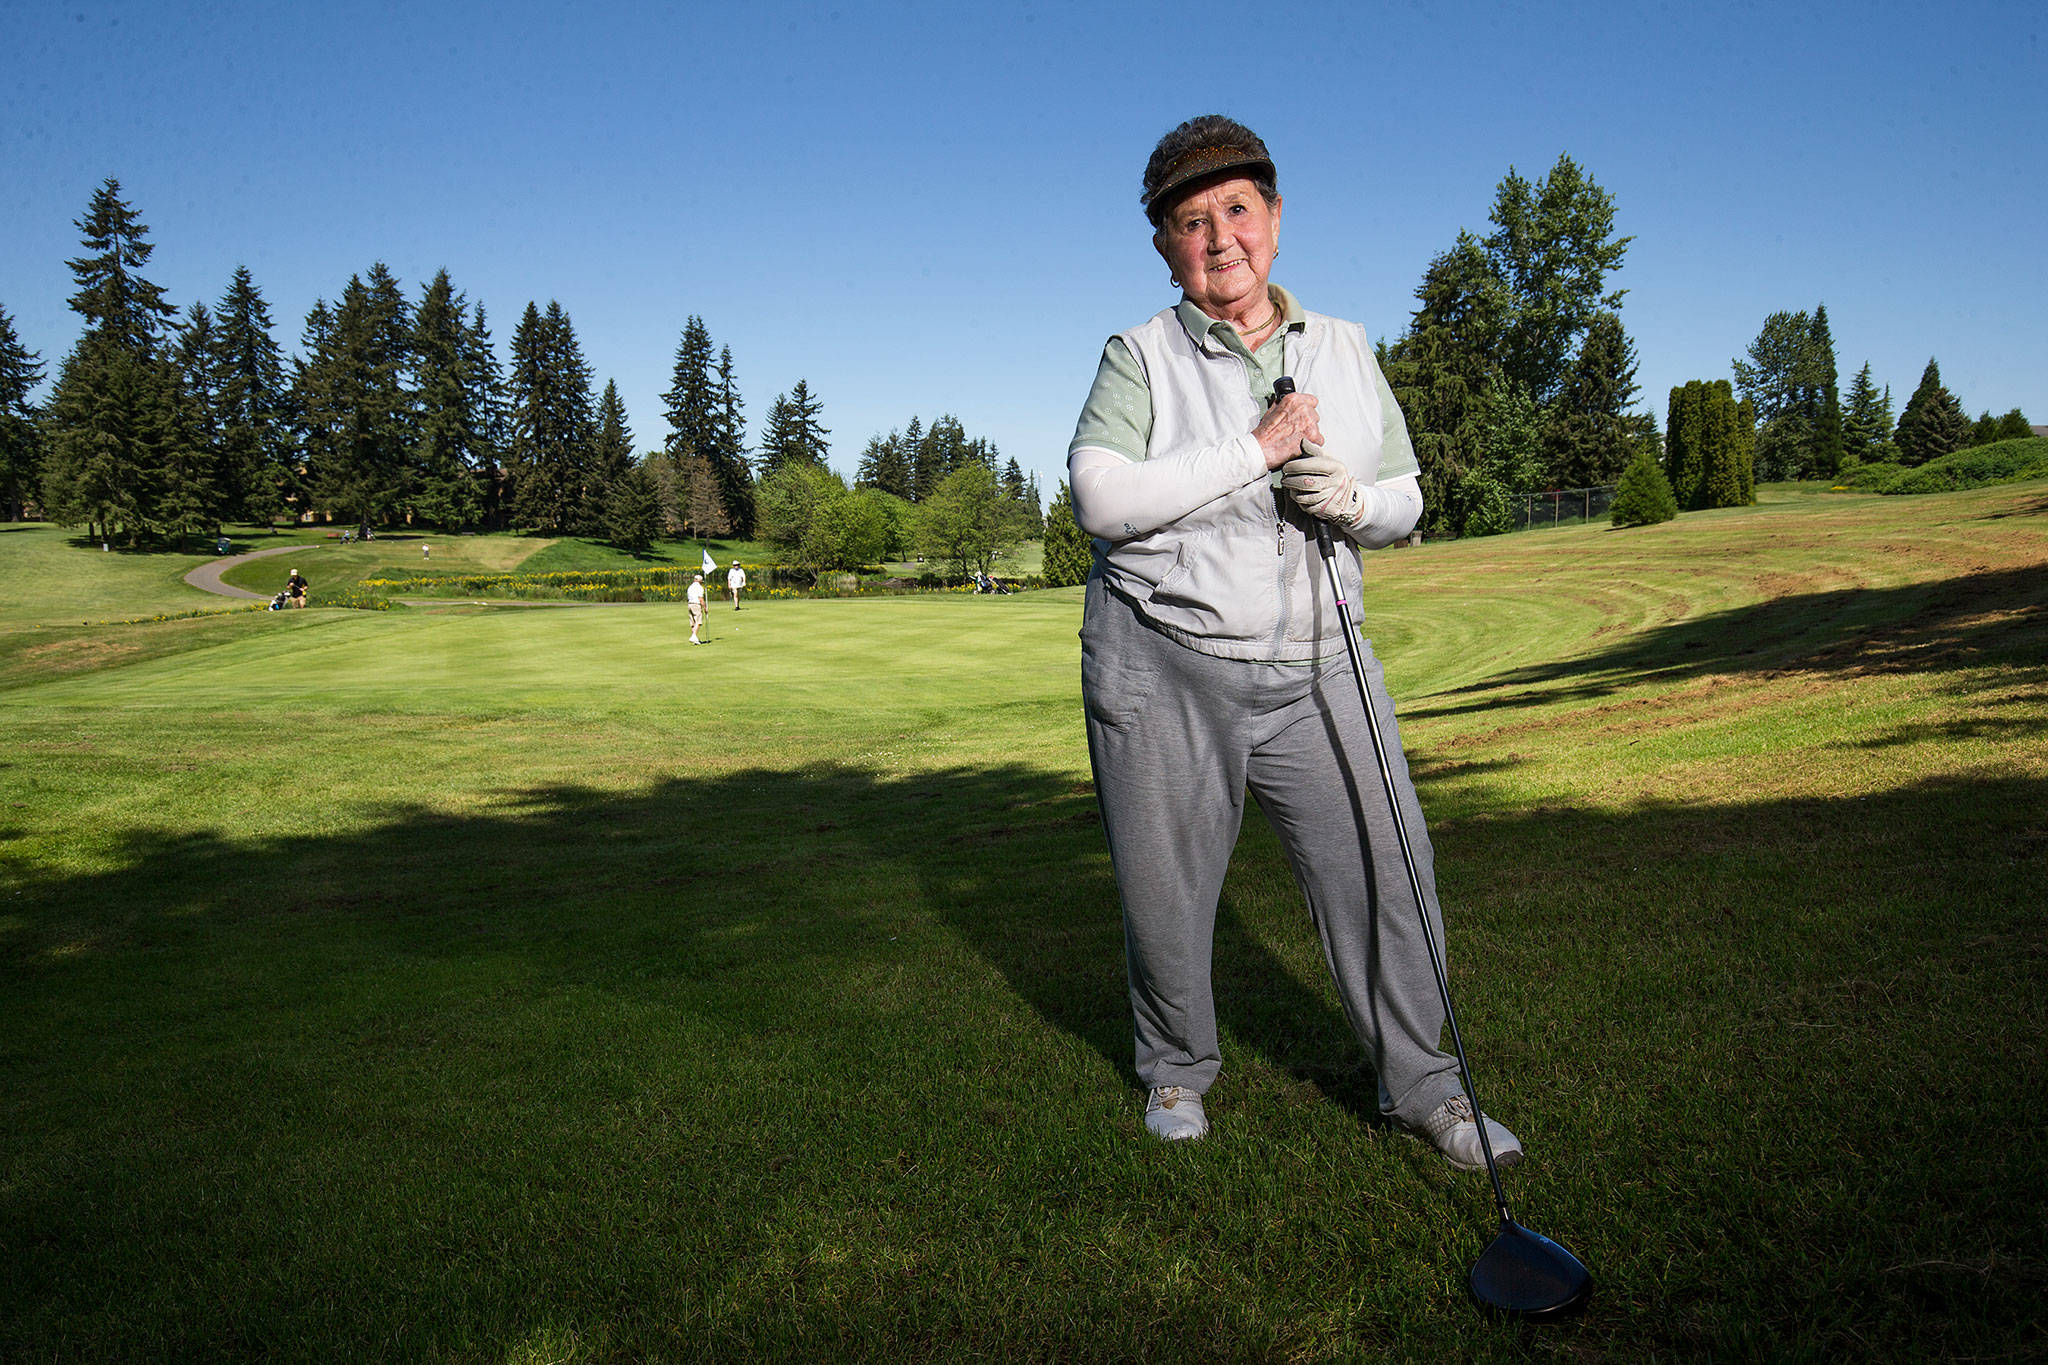 91-year-old golfer Bette Moore stands along on the 14th hole at Walter Hall Golf Course in Everett on Tuesday. Moore recently hit a hole-in-one on the hole. (Andy Bronson / The Herald)